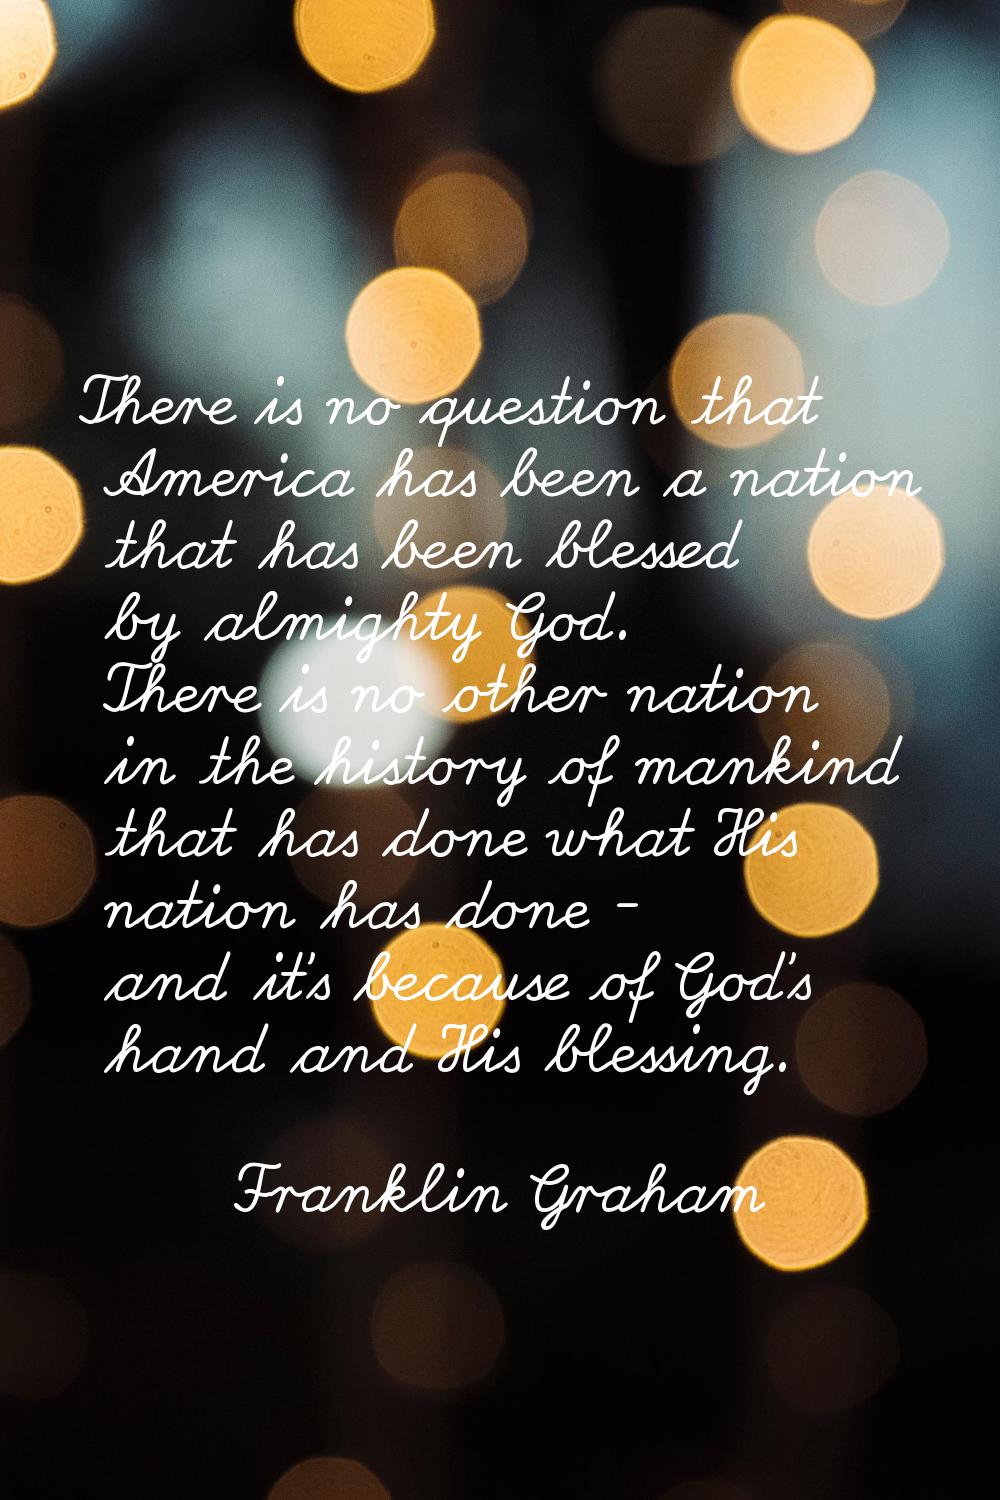 There is no question that America has been a nation that has been blessed by almighty God. There is